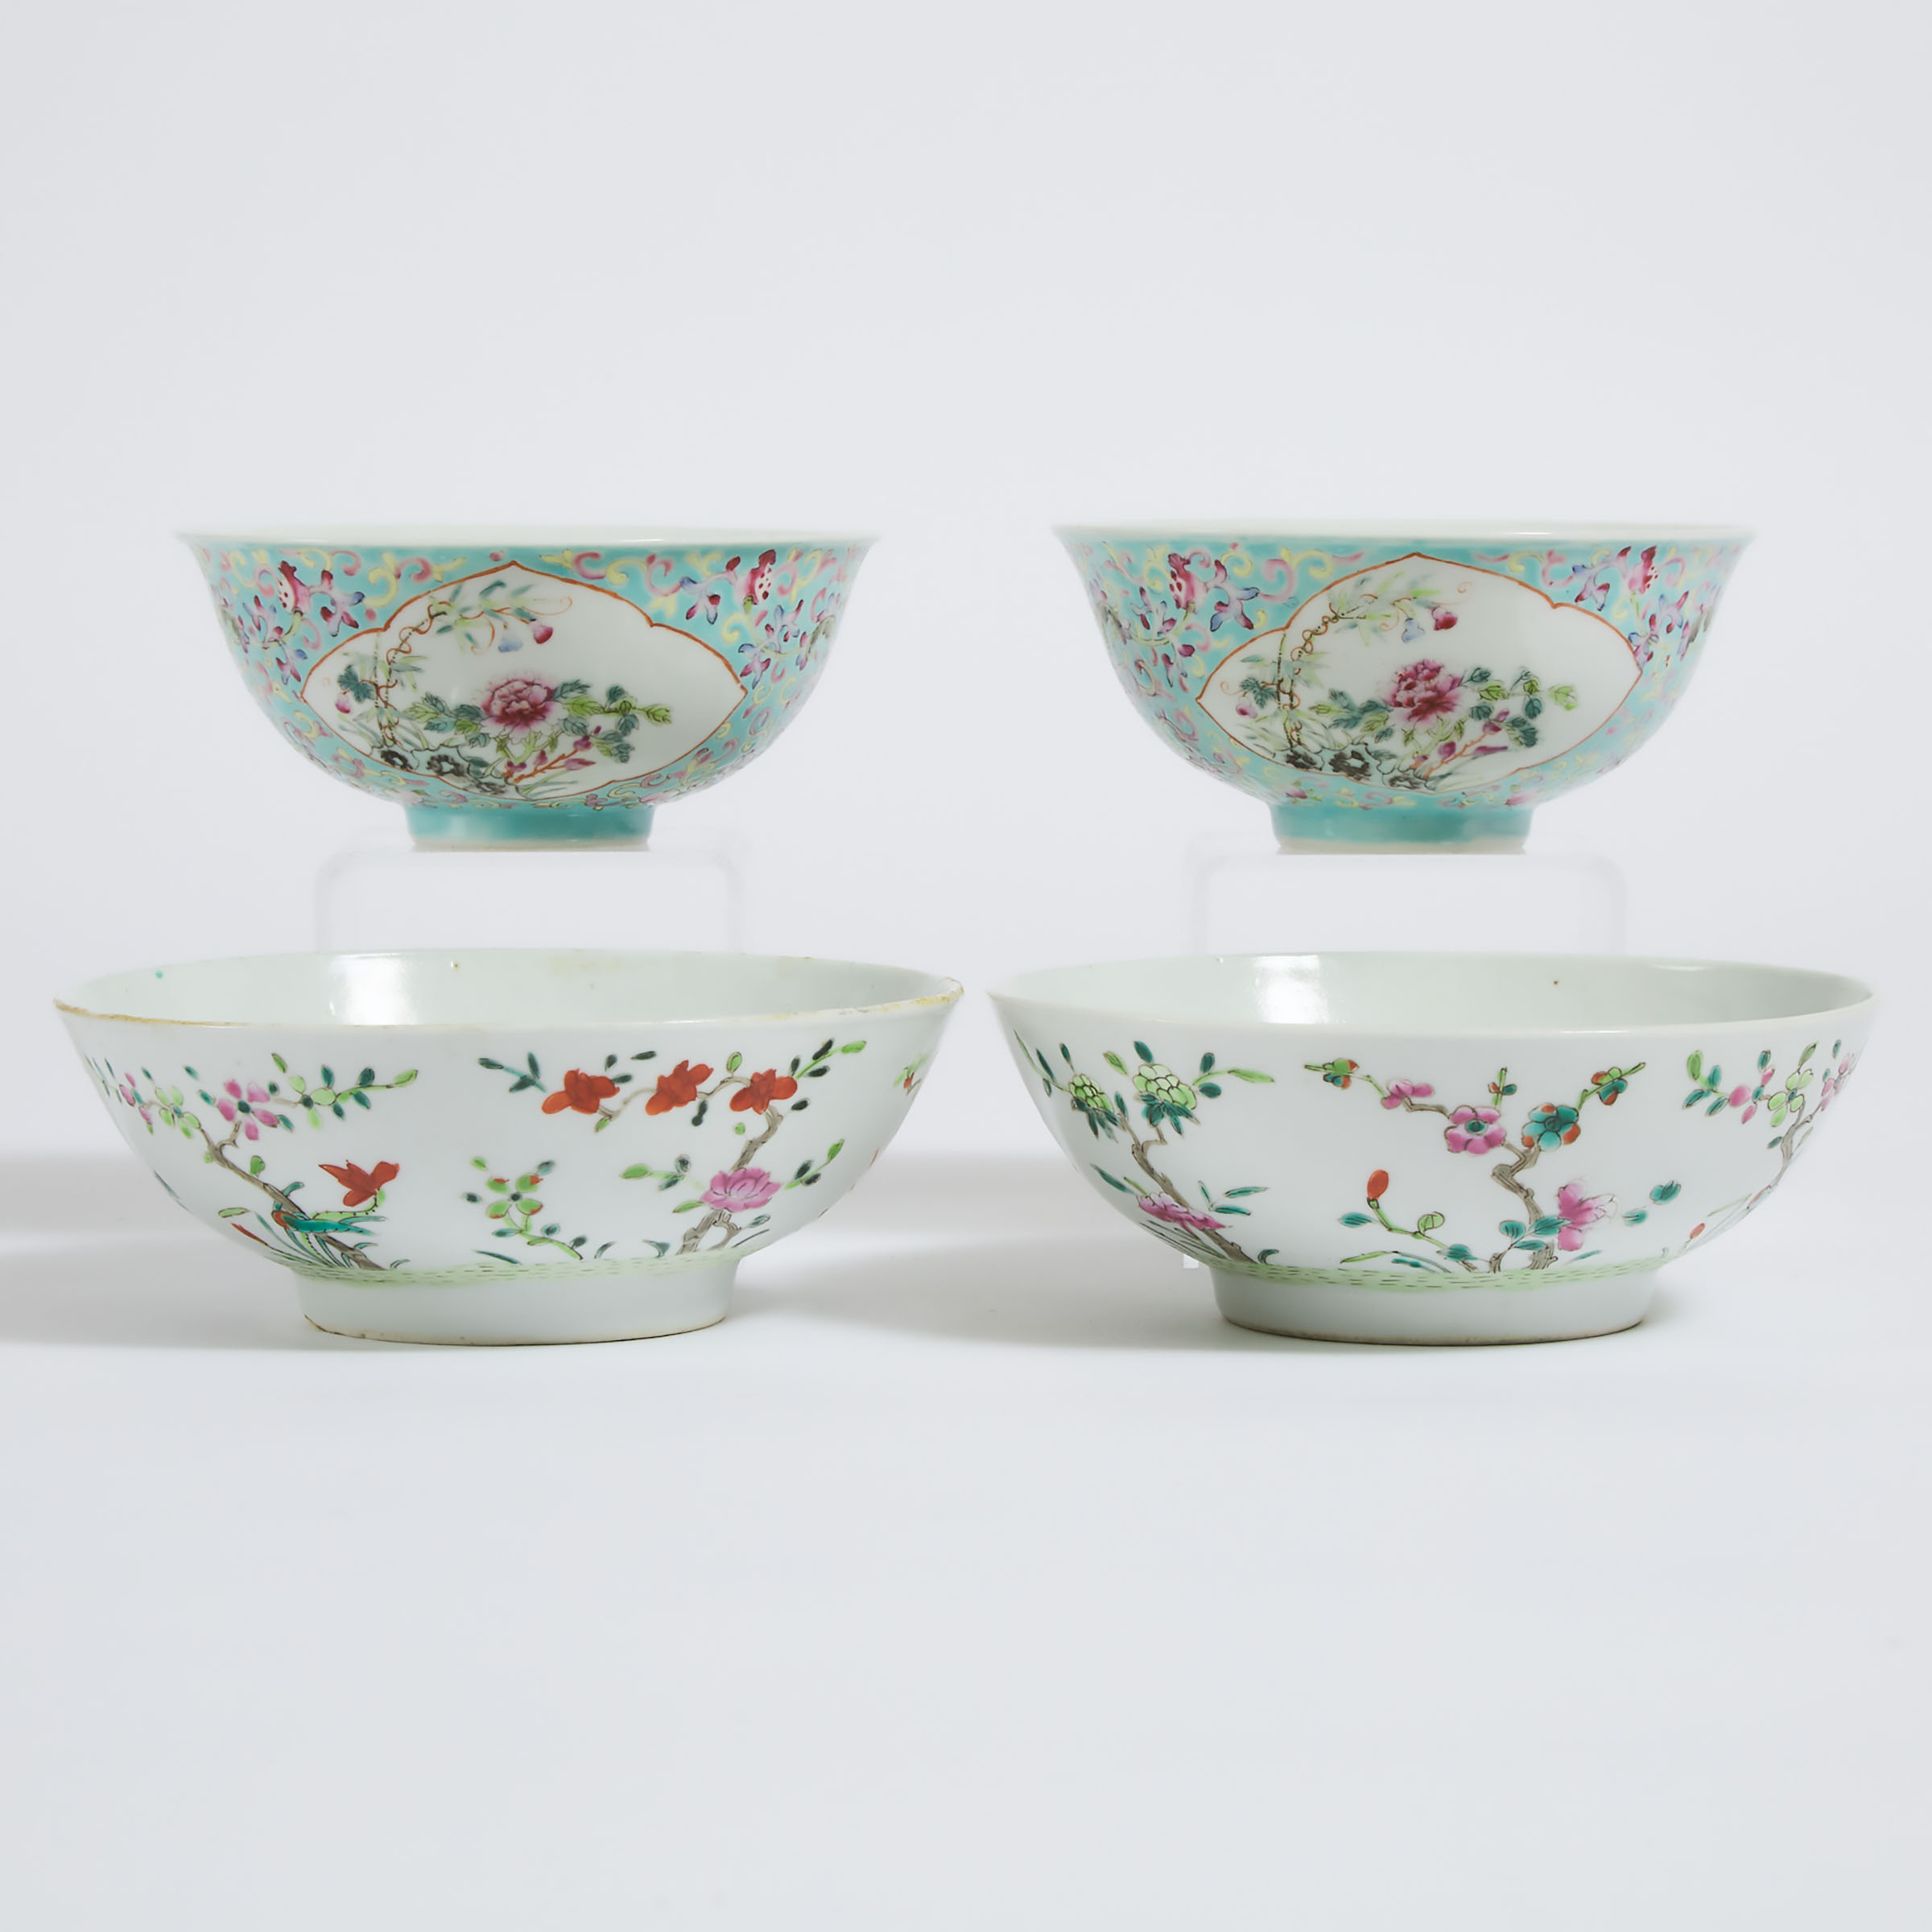 Two Pairs of Famille Rose Bowls, 19th Century and Later